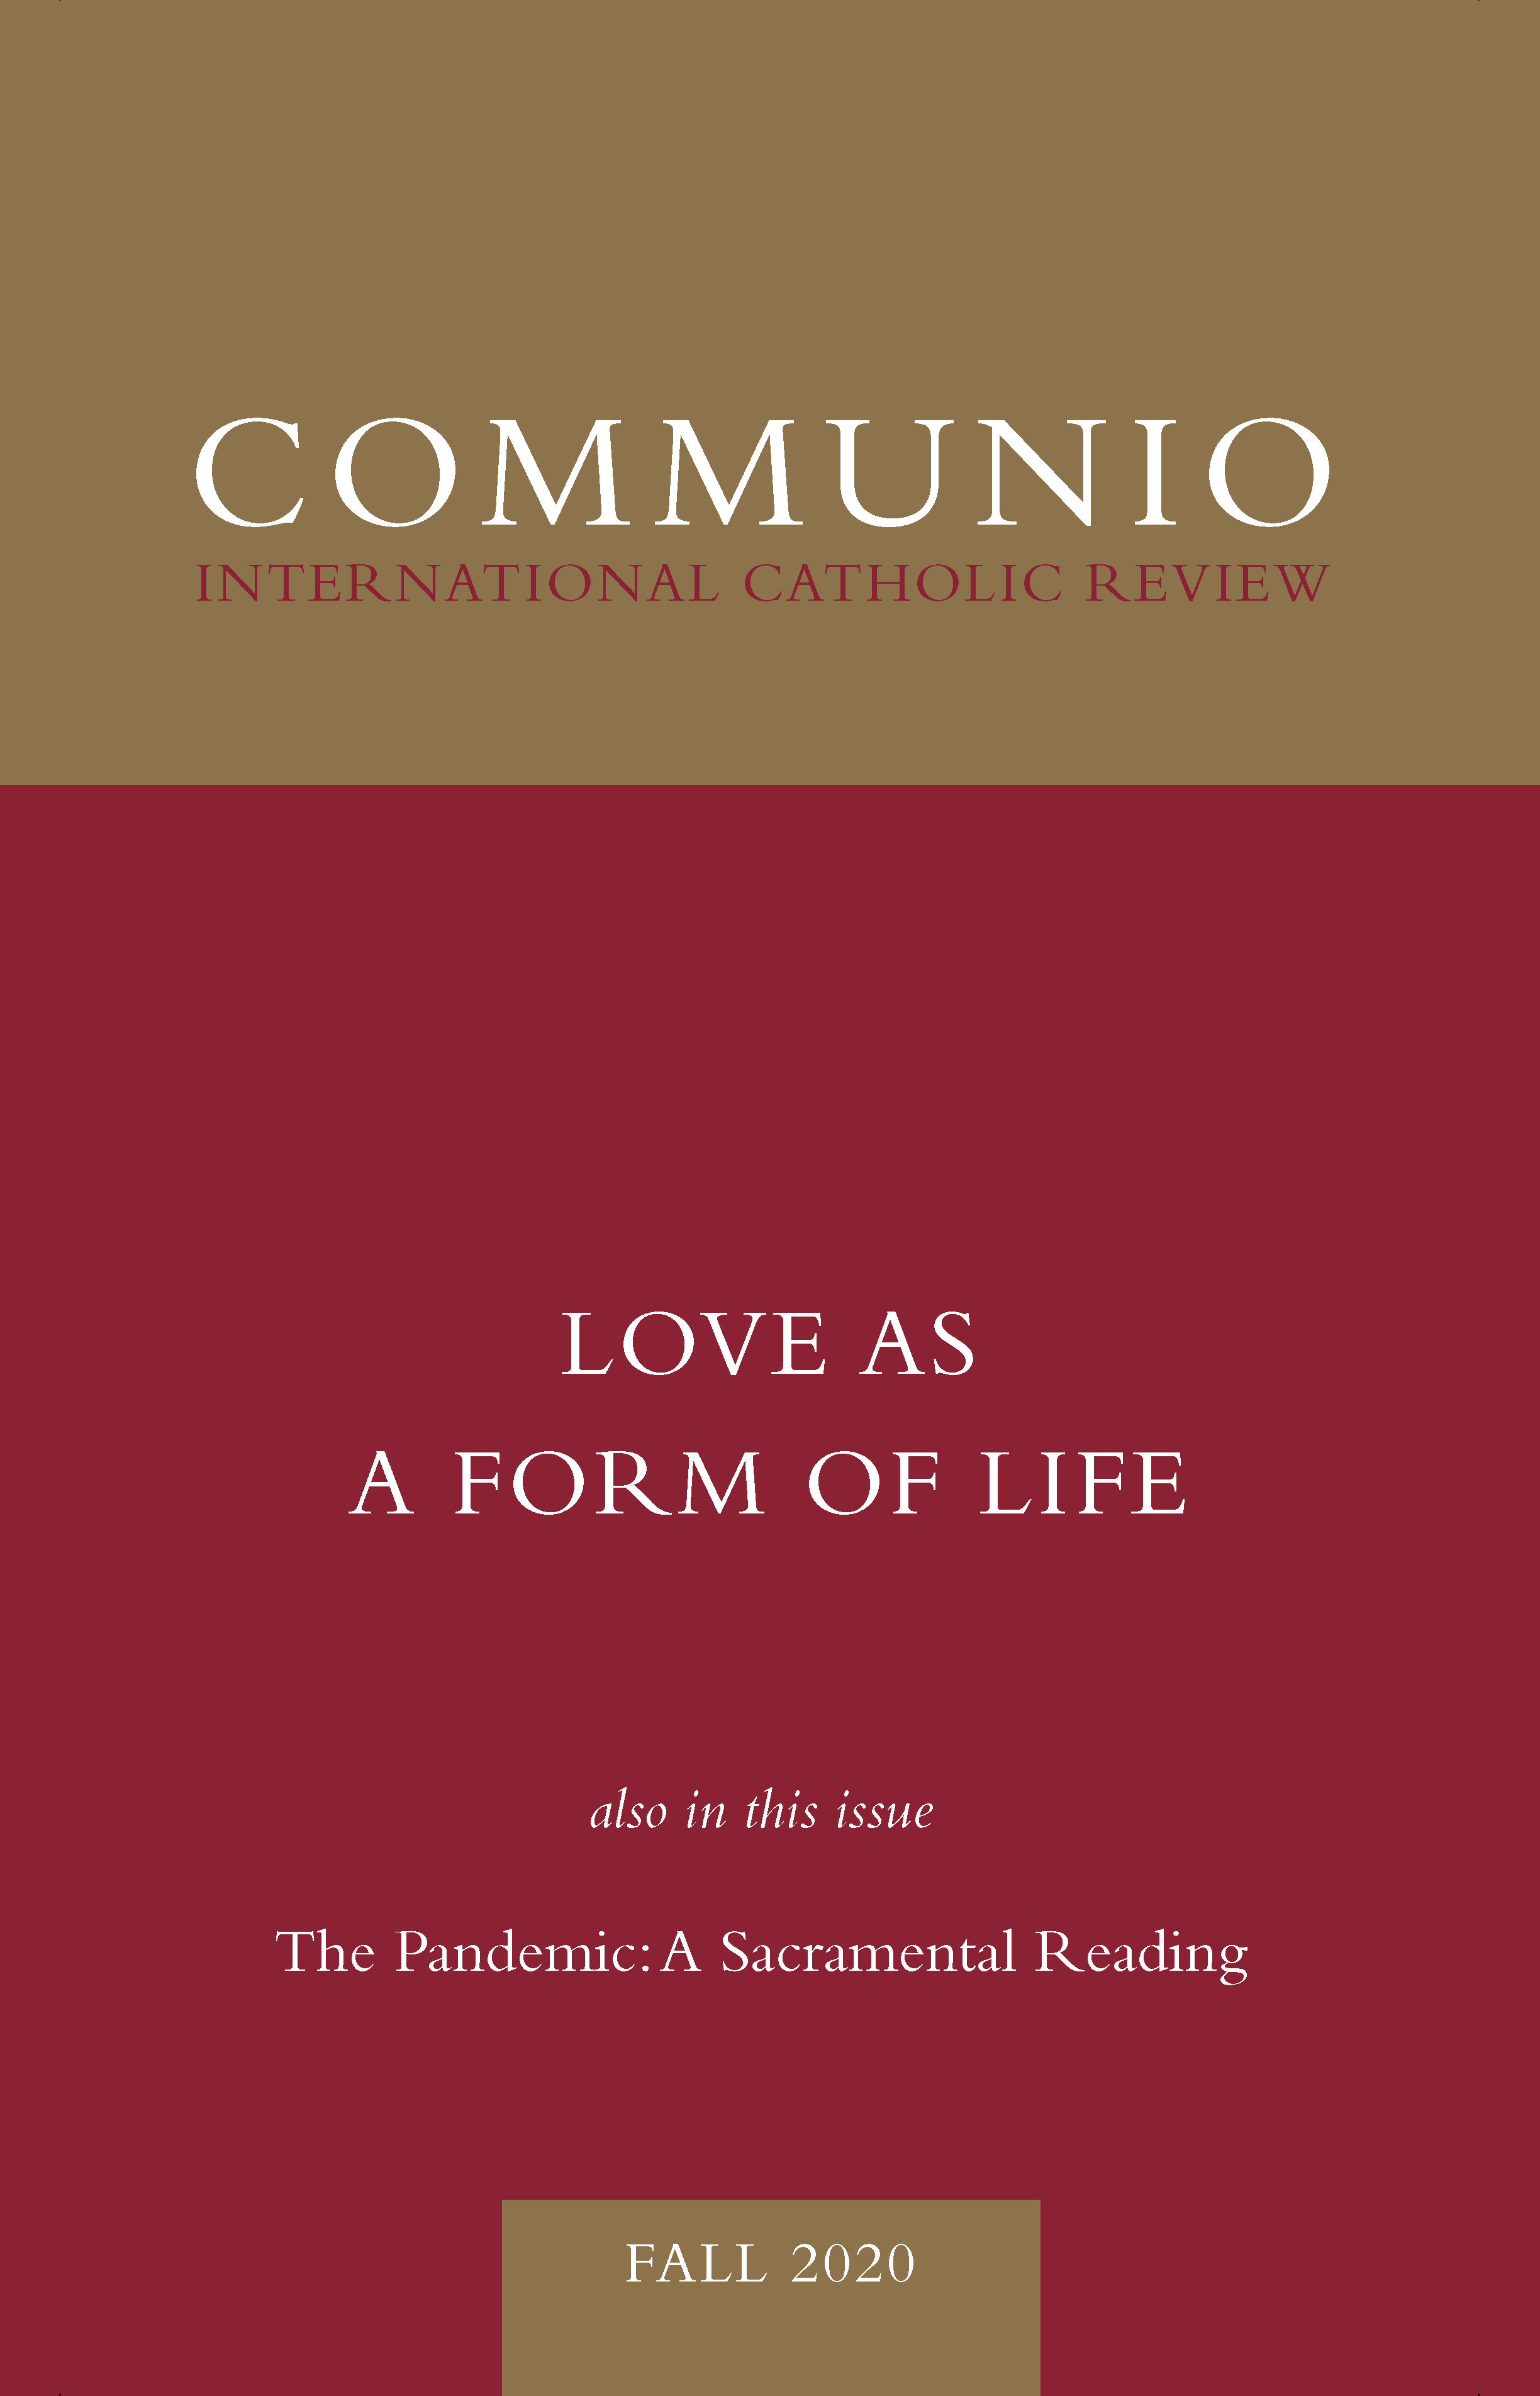 Communio - Fall 2020 - Love as a Form of Life